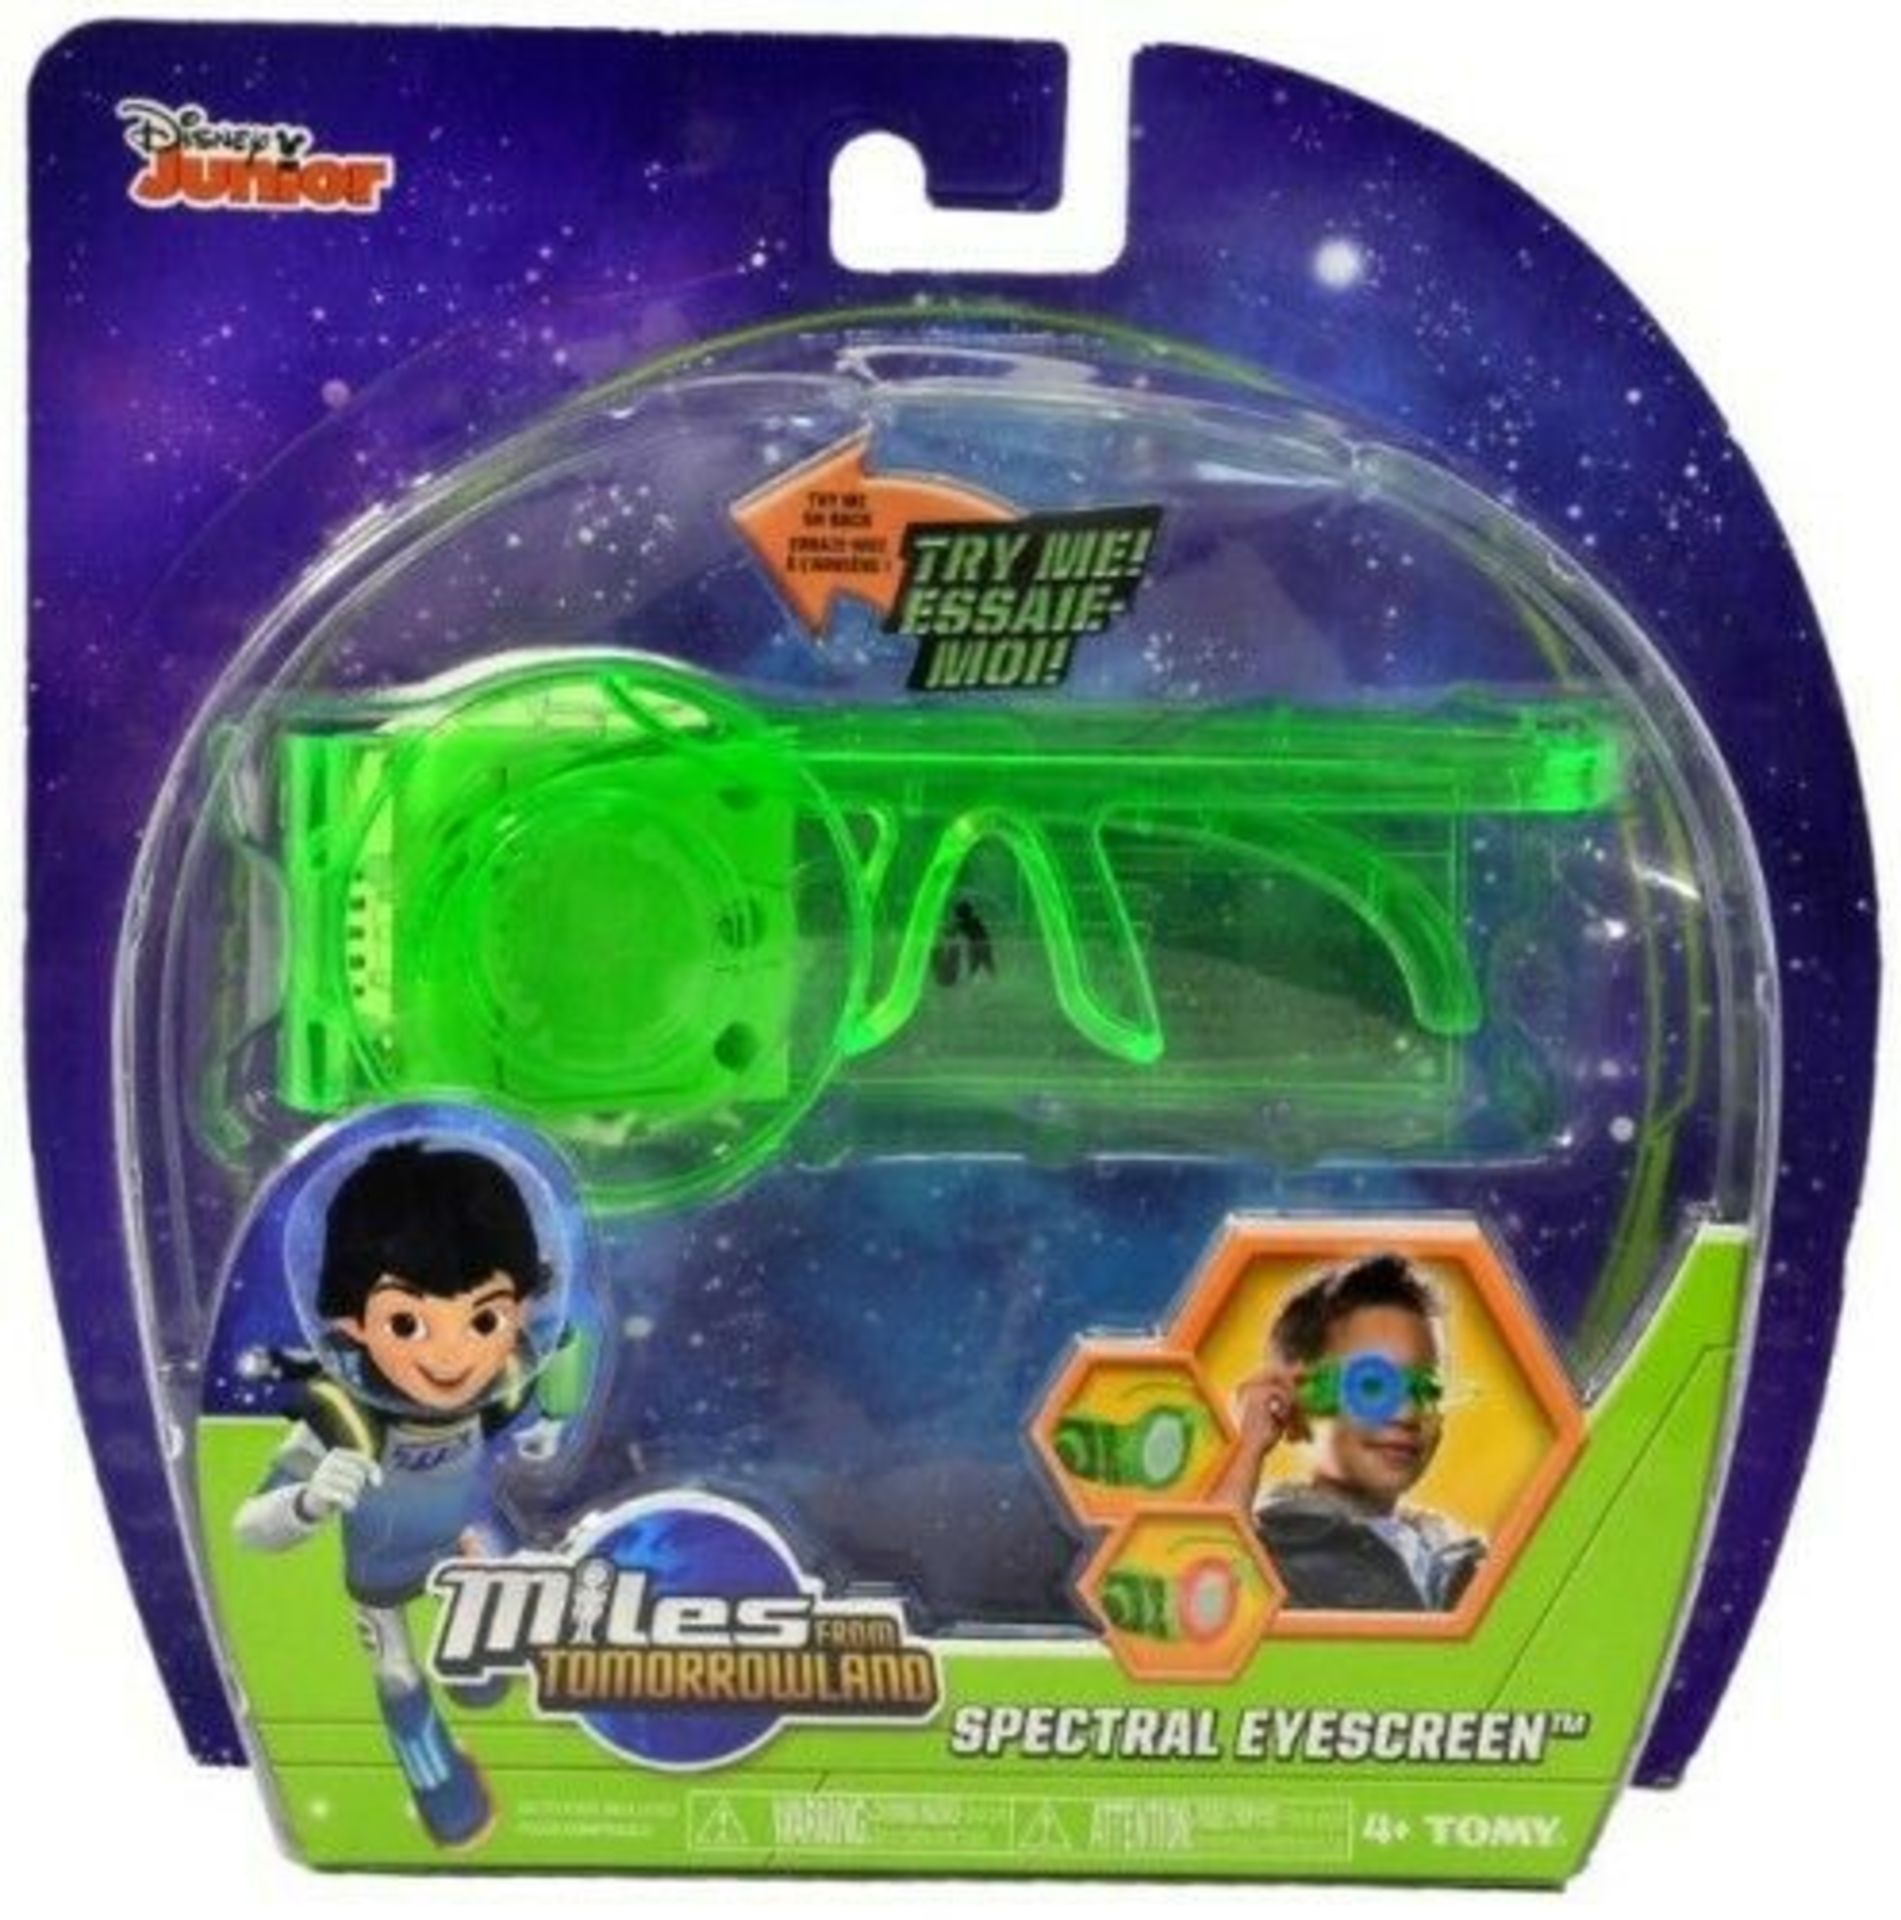 20 x miles from tomorrowland spectral eyescreens. new & boxed